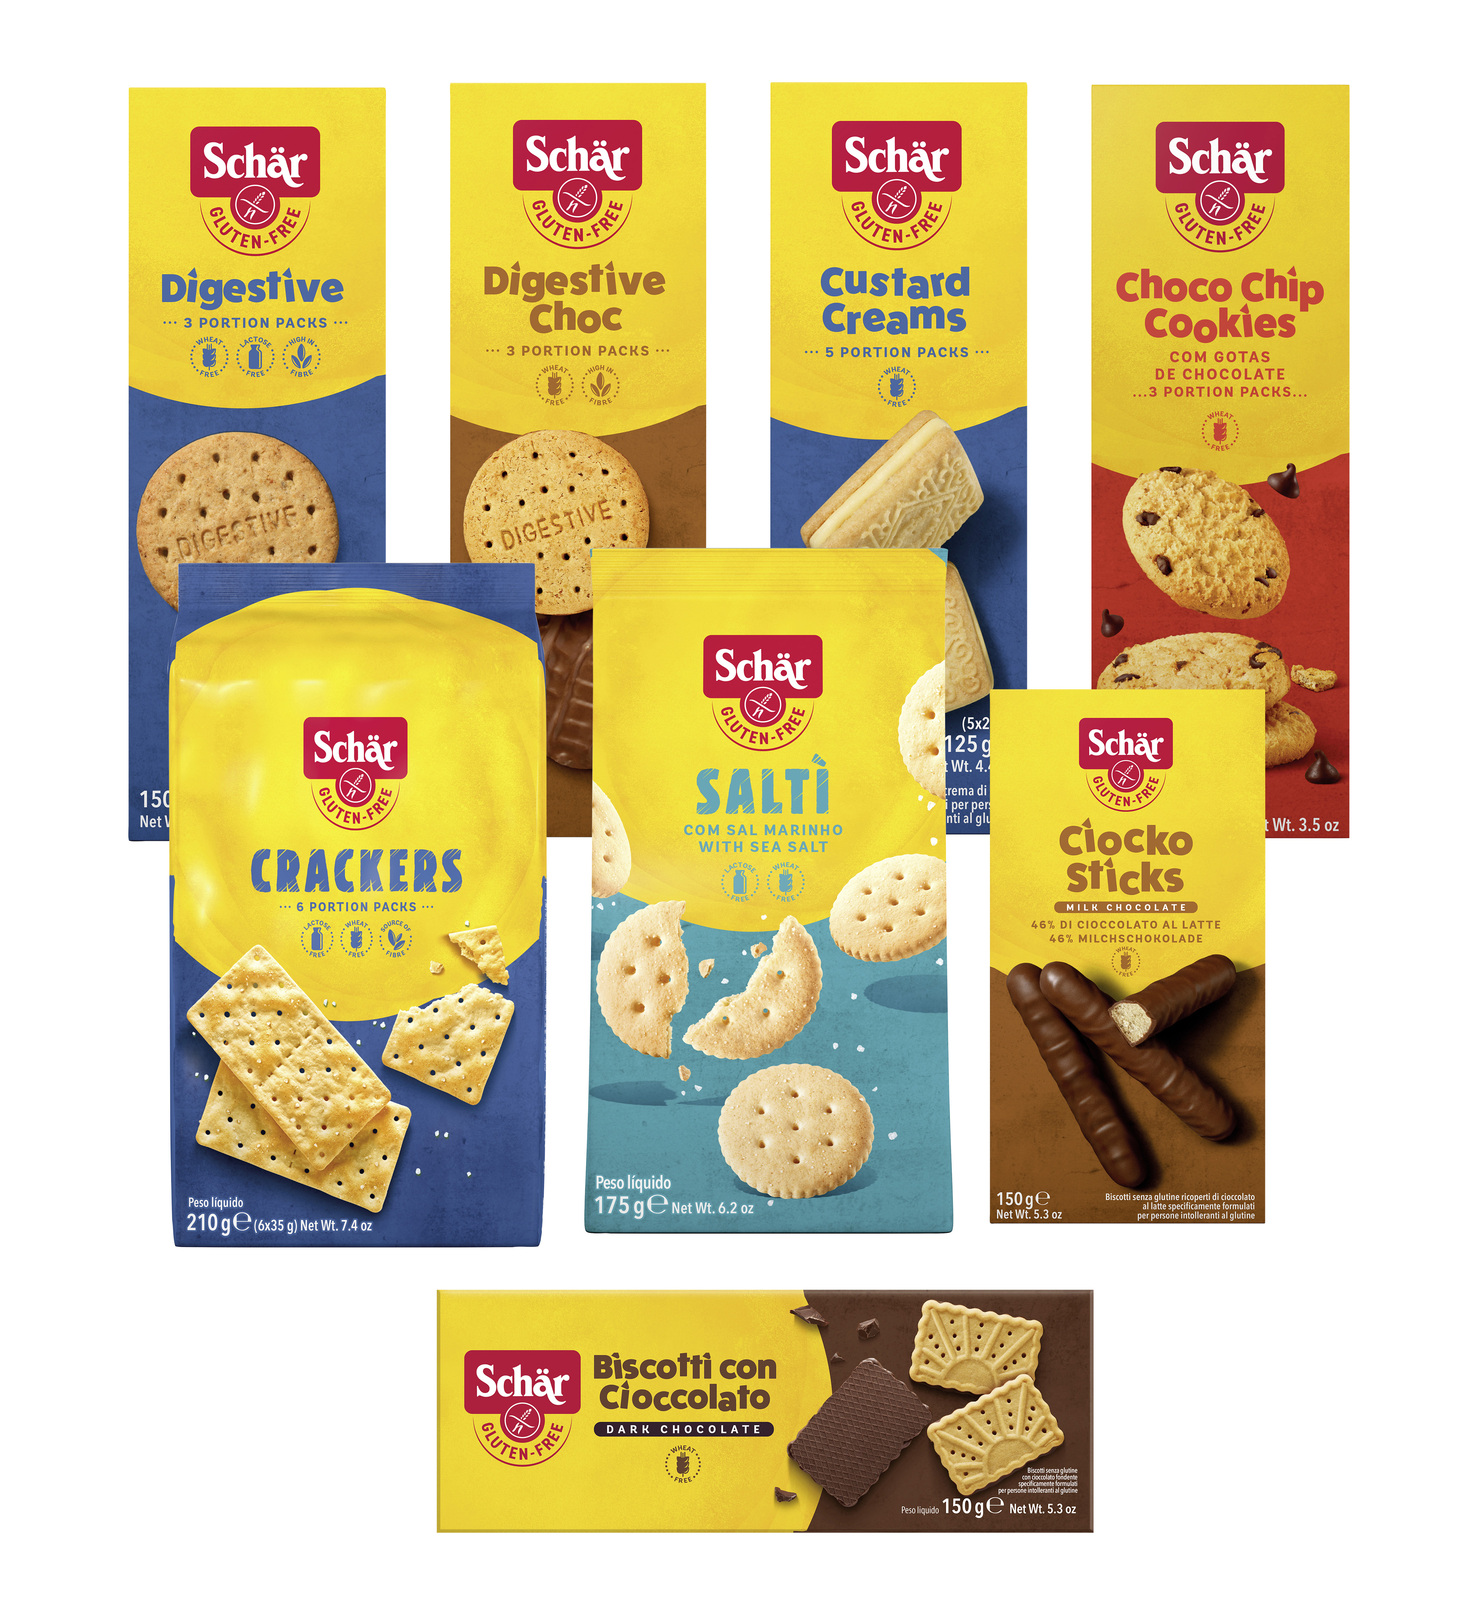 Schar Biscuits Stand Deal - Introductory Special 15% Discount, Bio Living